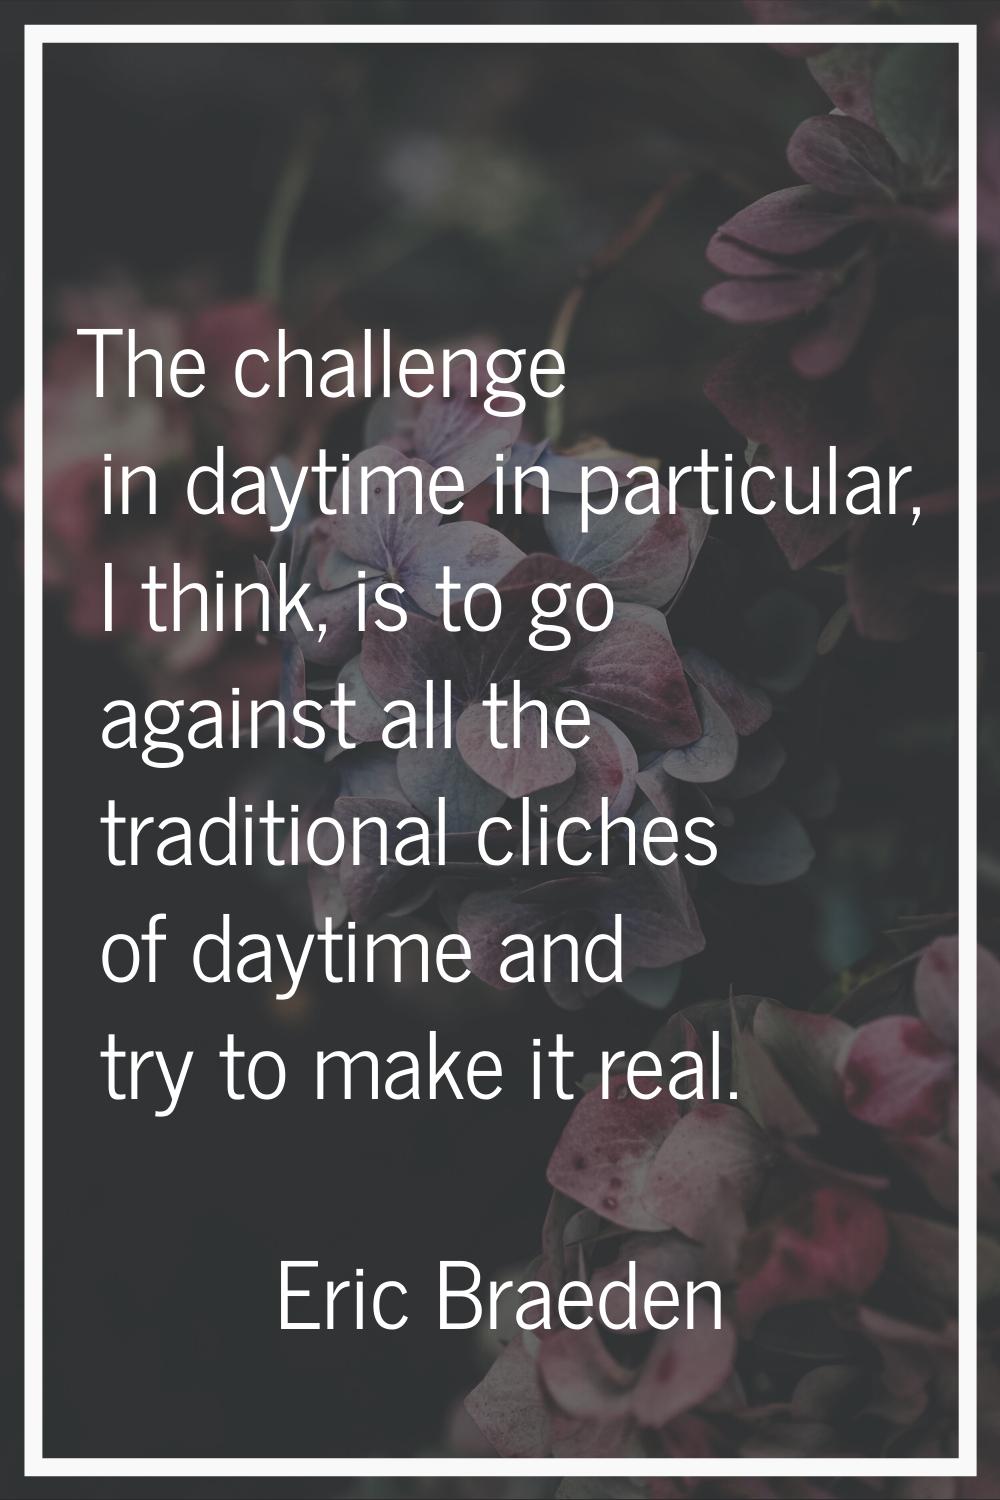 The challenge in daytime in particular, I think, is to go against all the traditional cliches of da